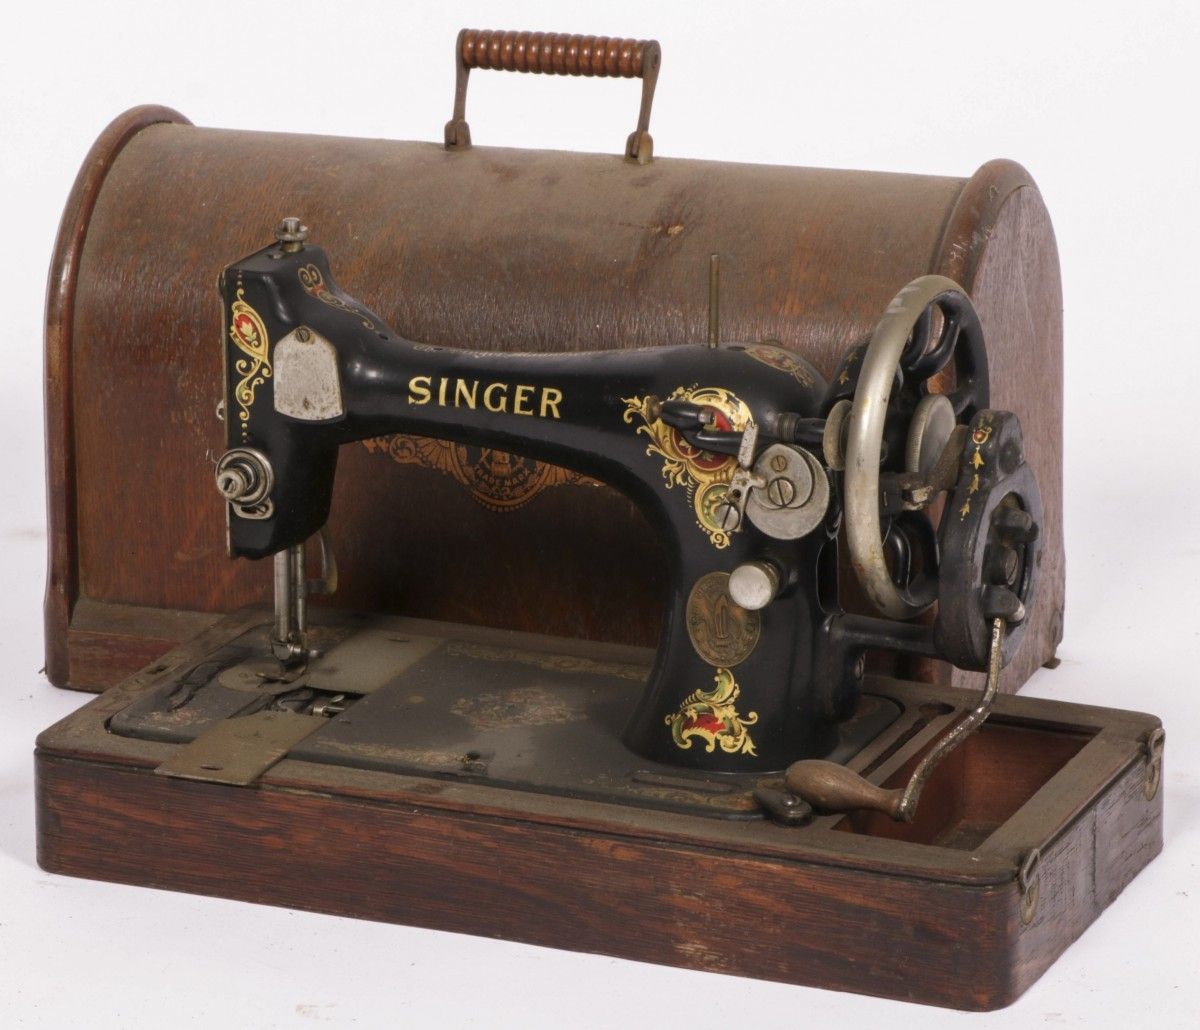 A cast iron Singer sewing machine in wooden casing, 20th century. Estimate: € 10&hellip;